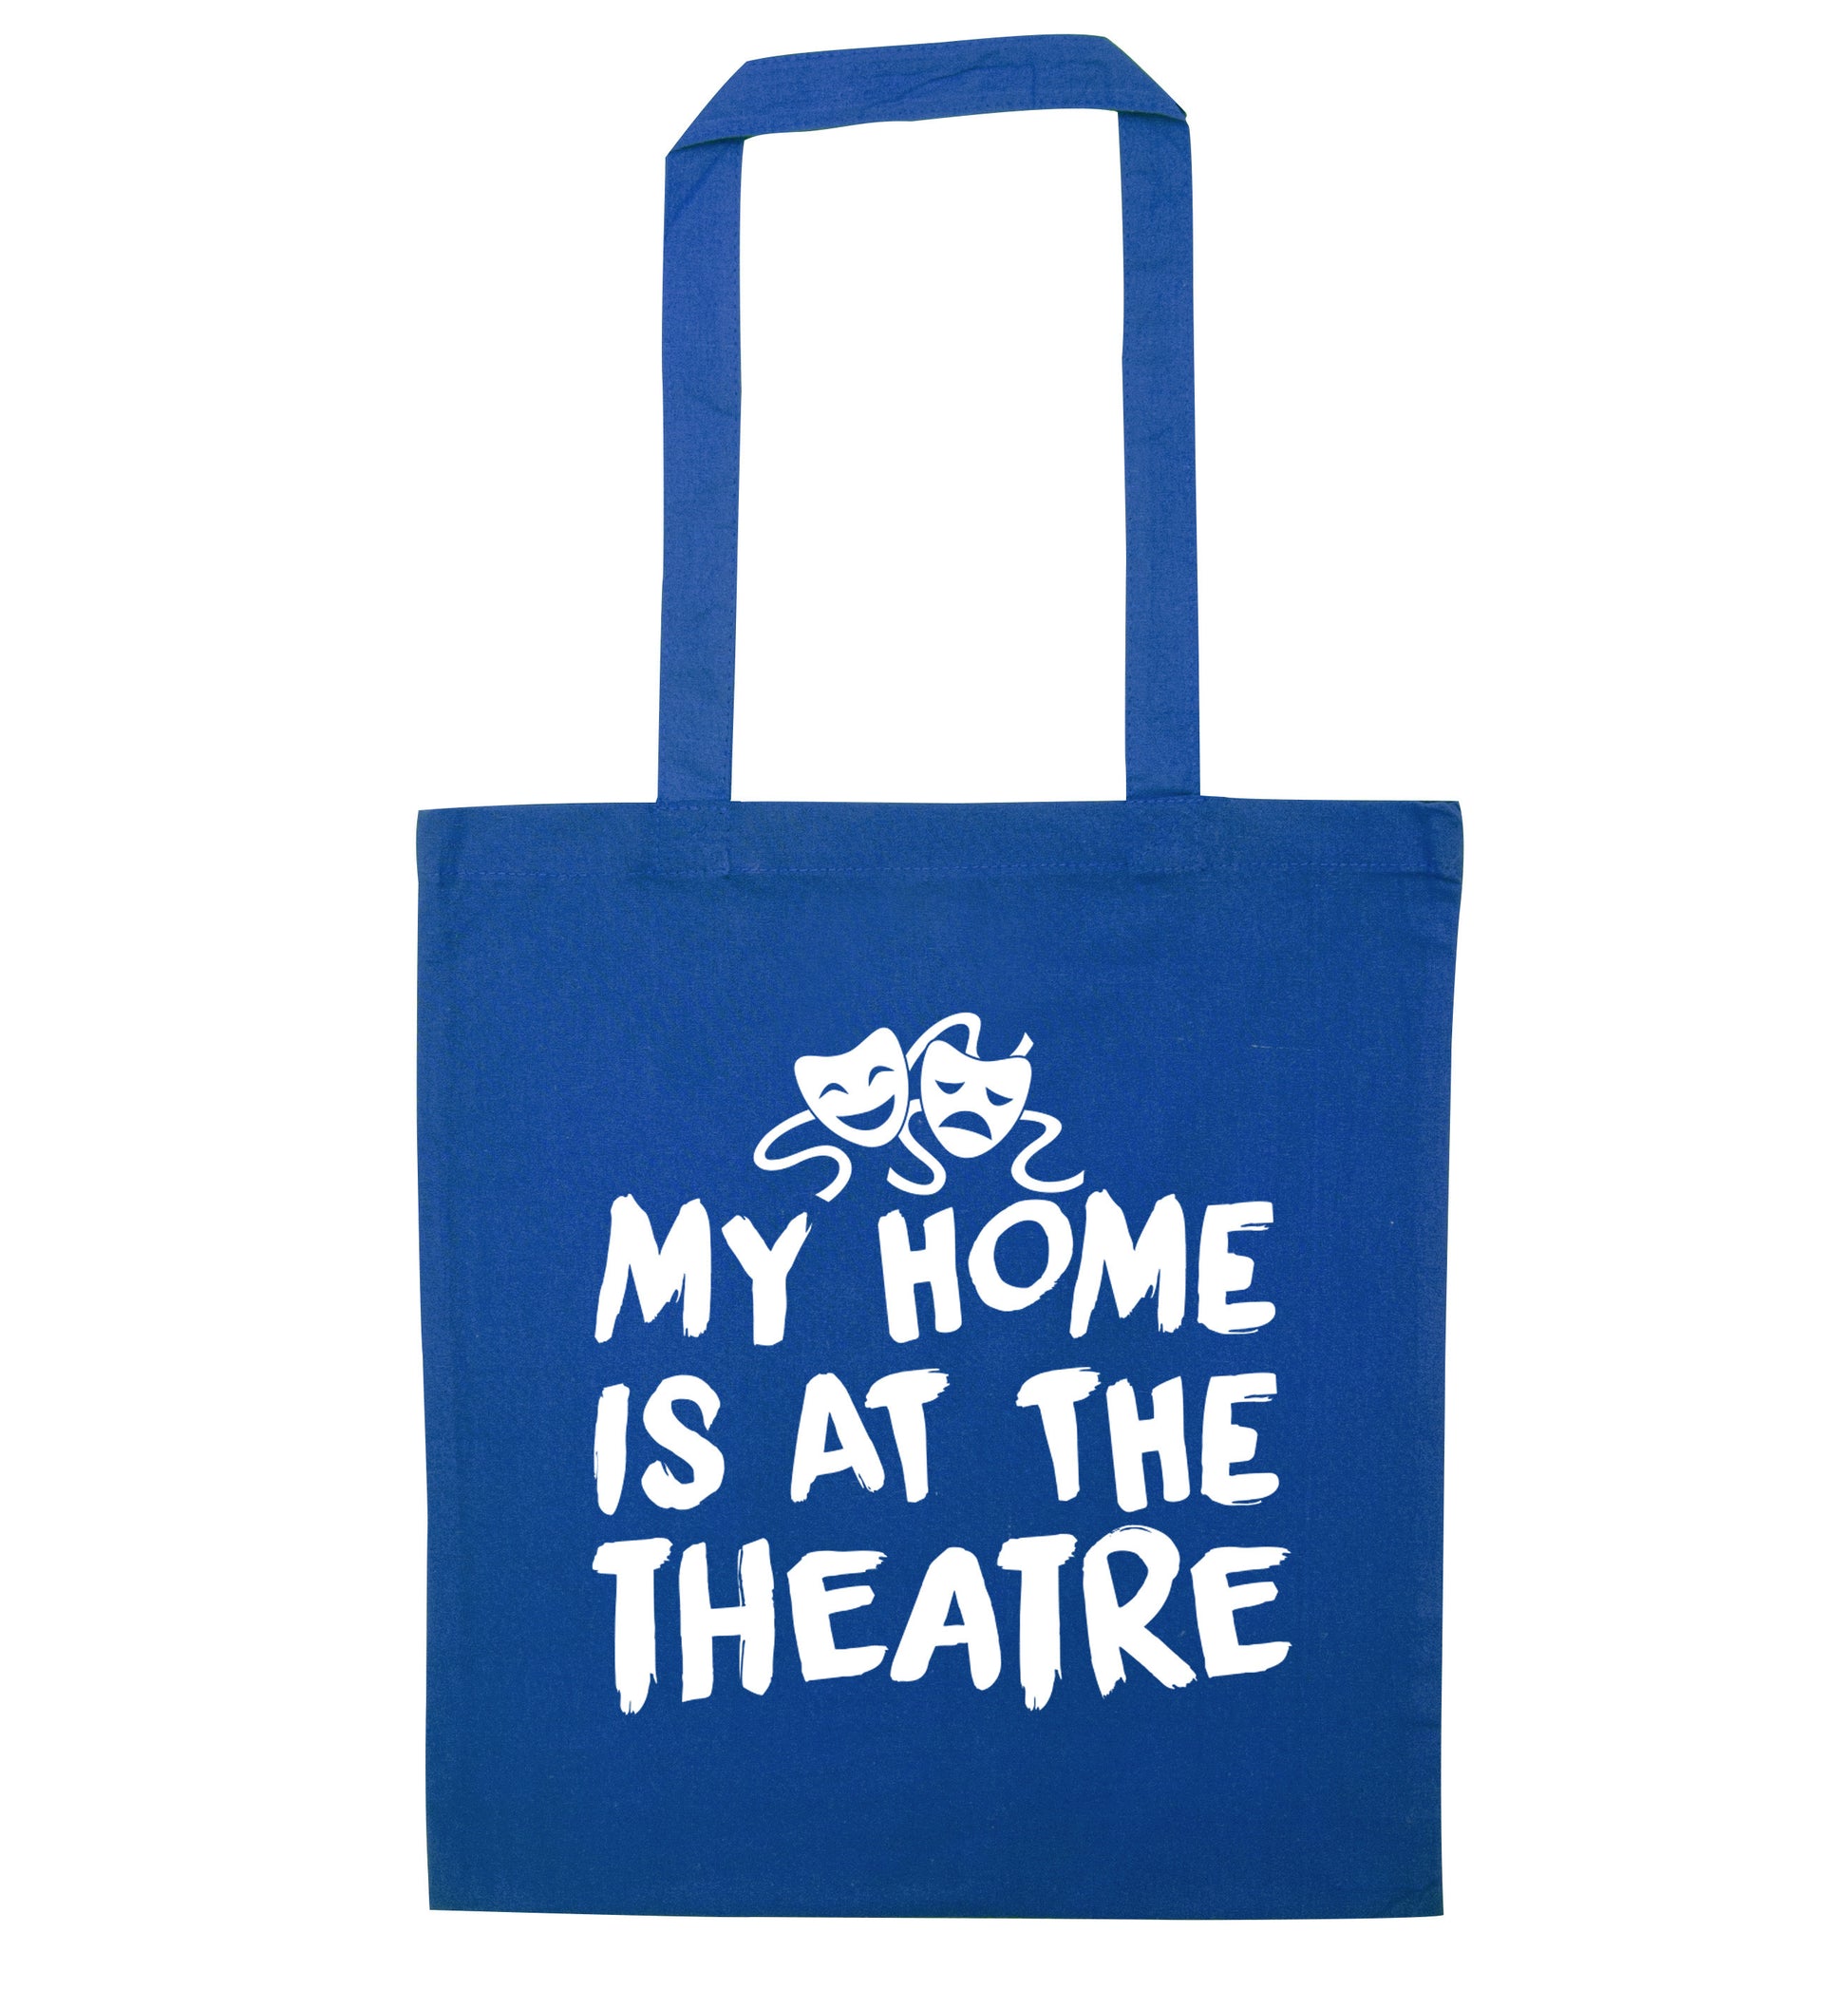 My home is at the theatre blue tote bag